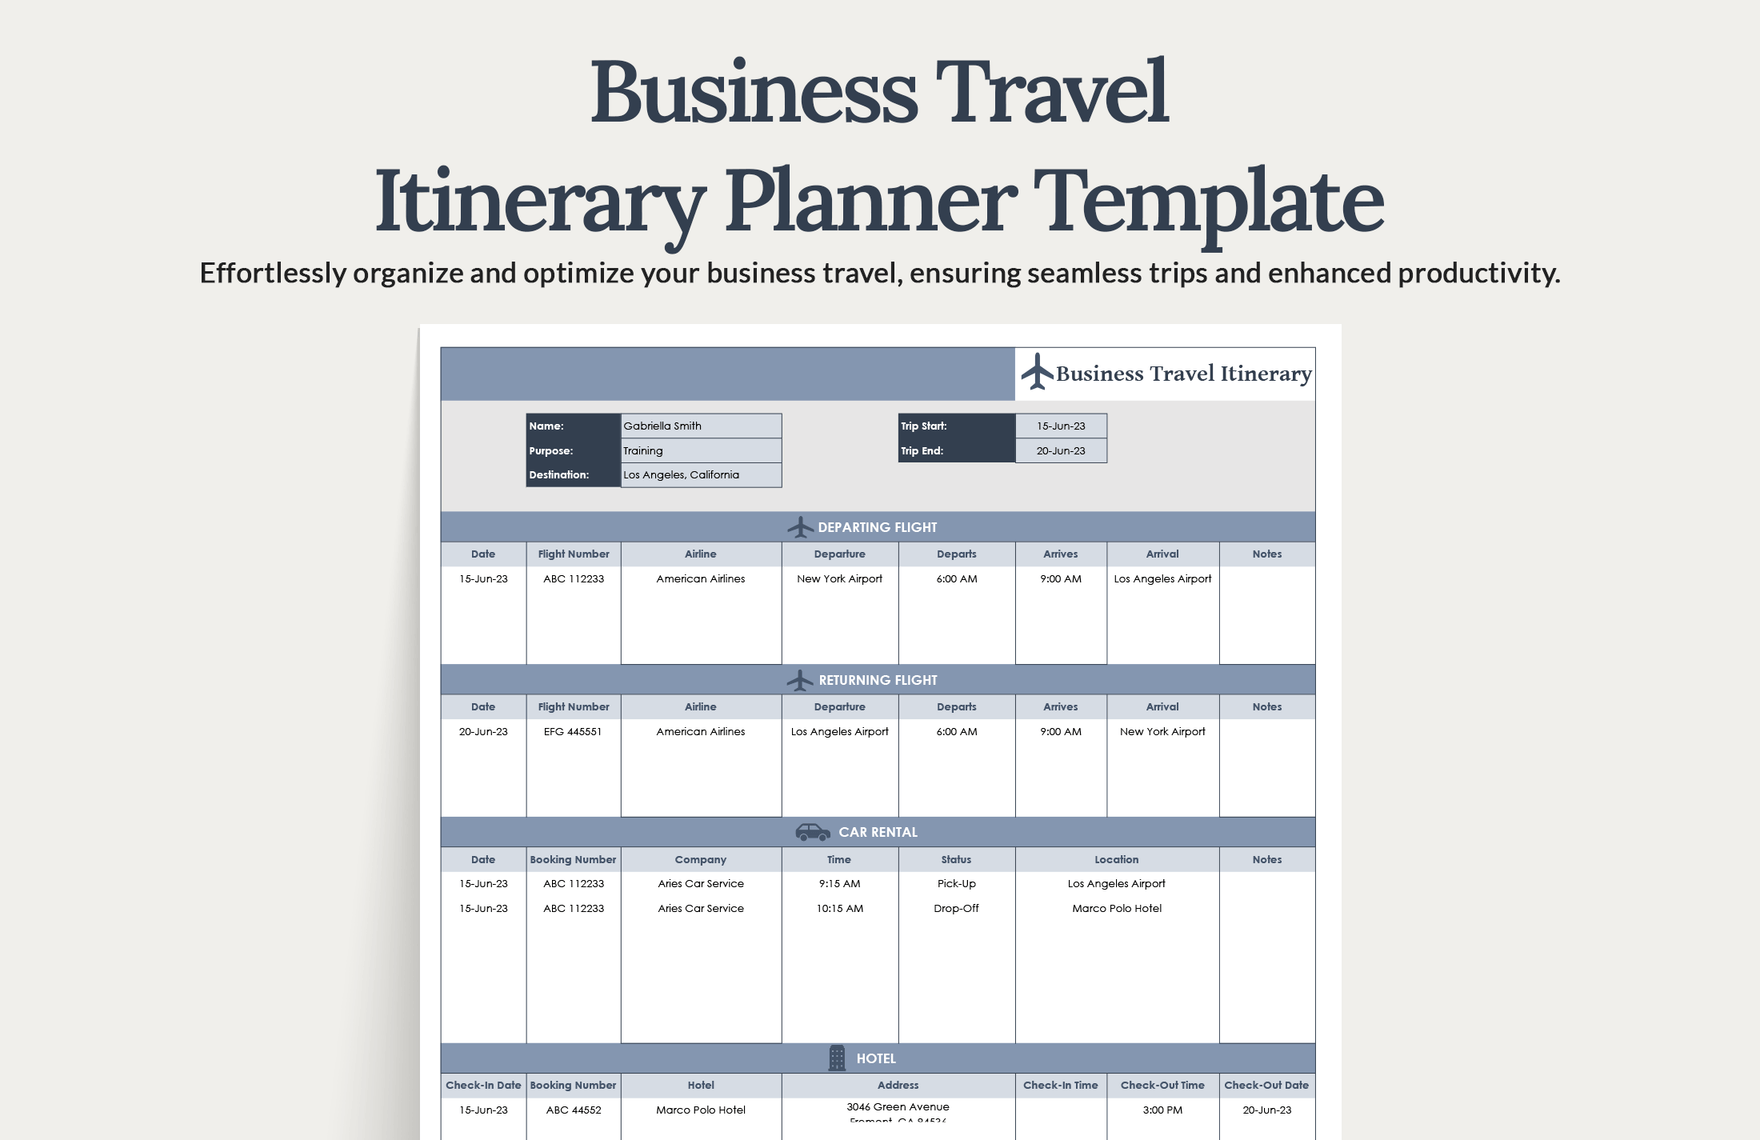 Business Travel Itinerary Planner Template in Word, Google Docs, Excel, PDF, Google Sheets, Apple Pages, Apple Numbers